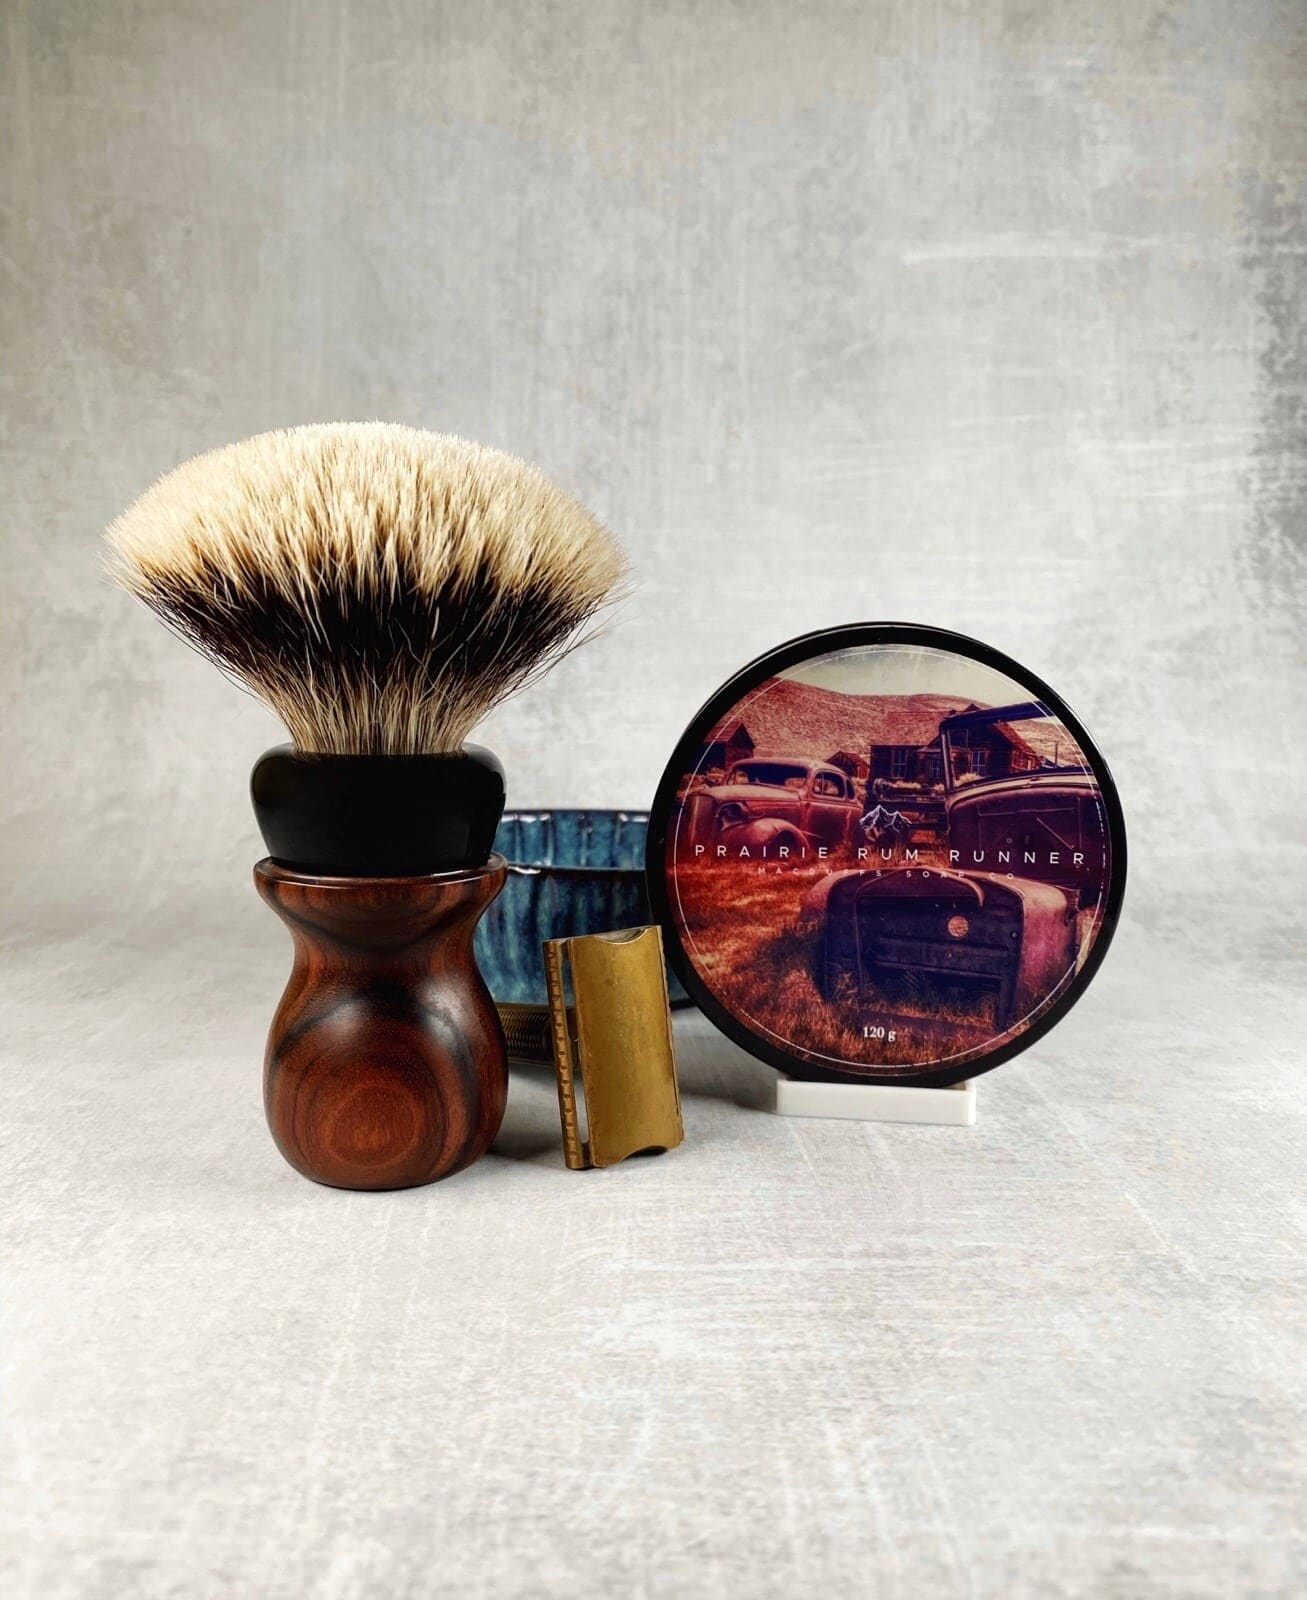 SOTD - July 22, 2020 - The Thirsty Badger Shave Company